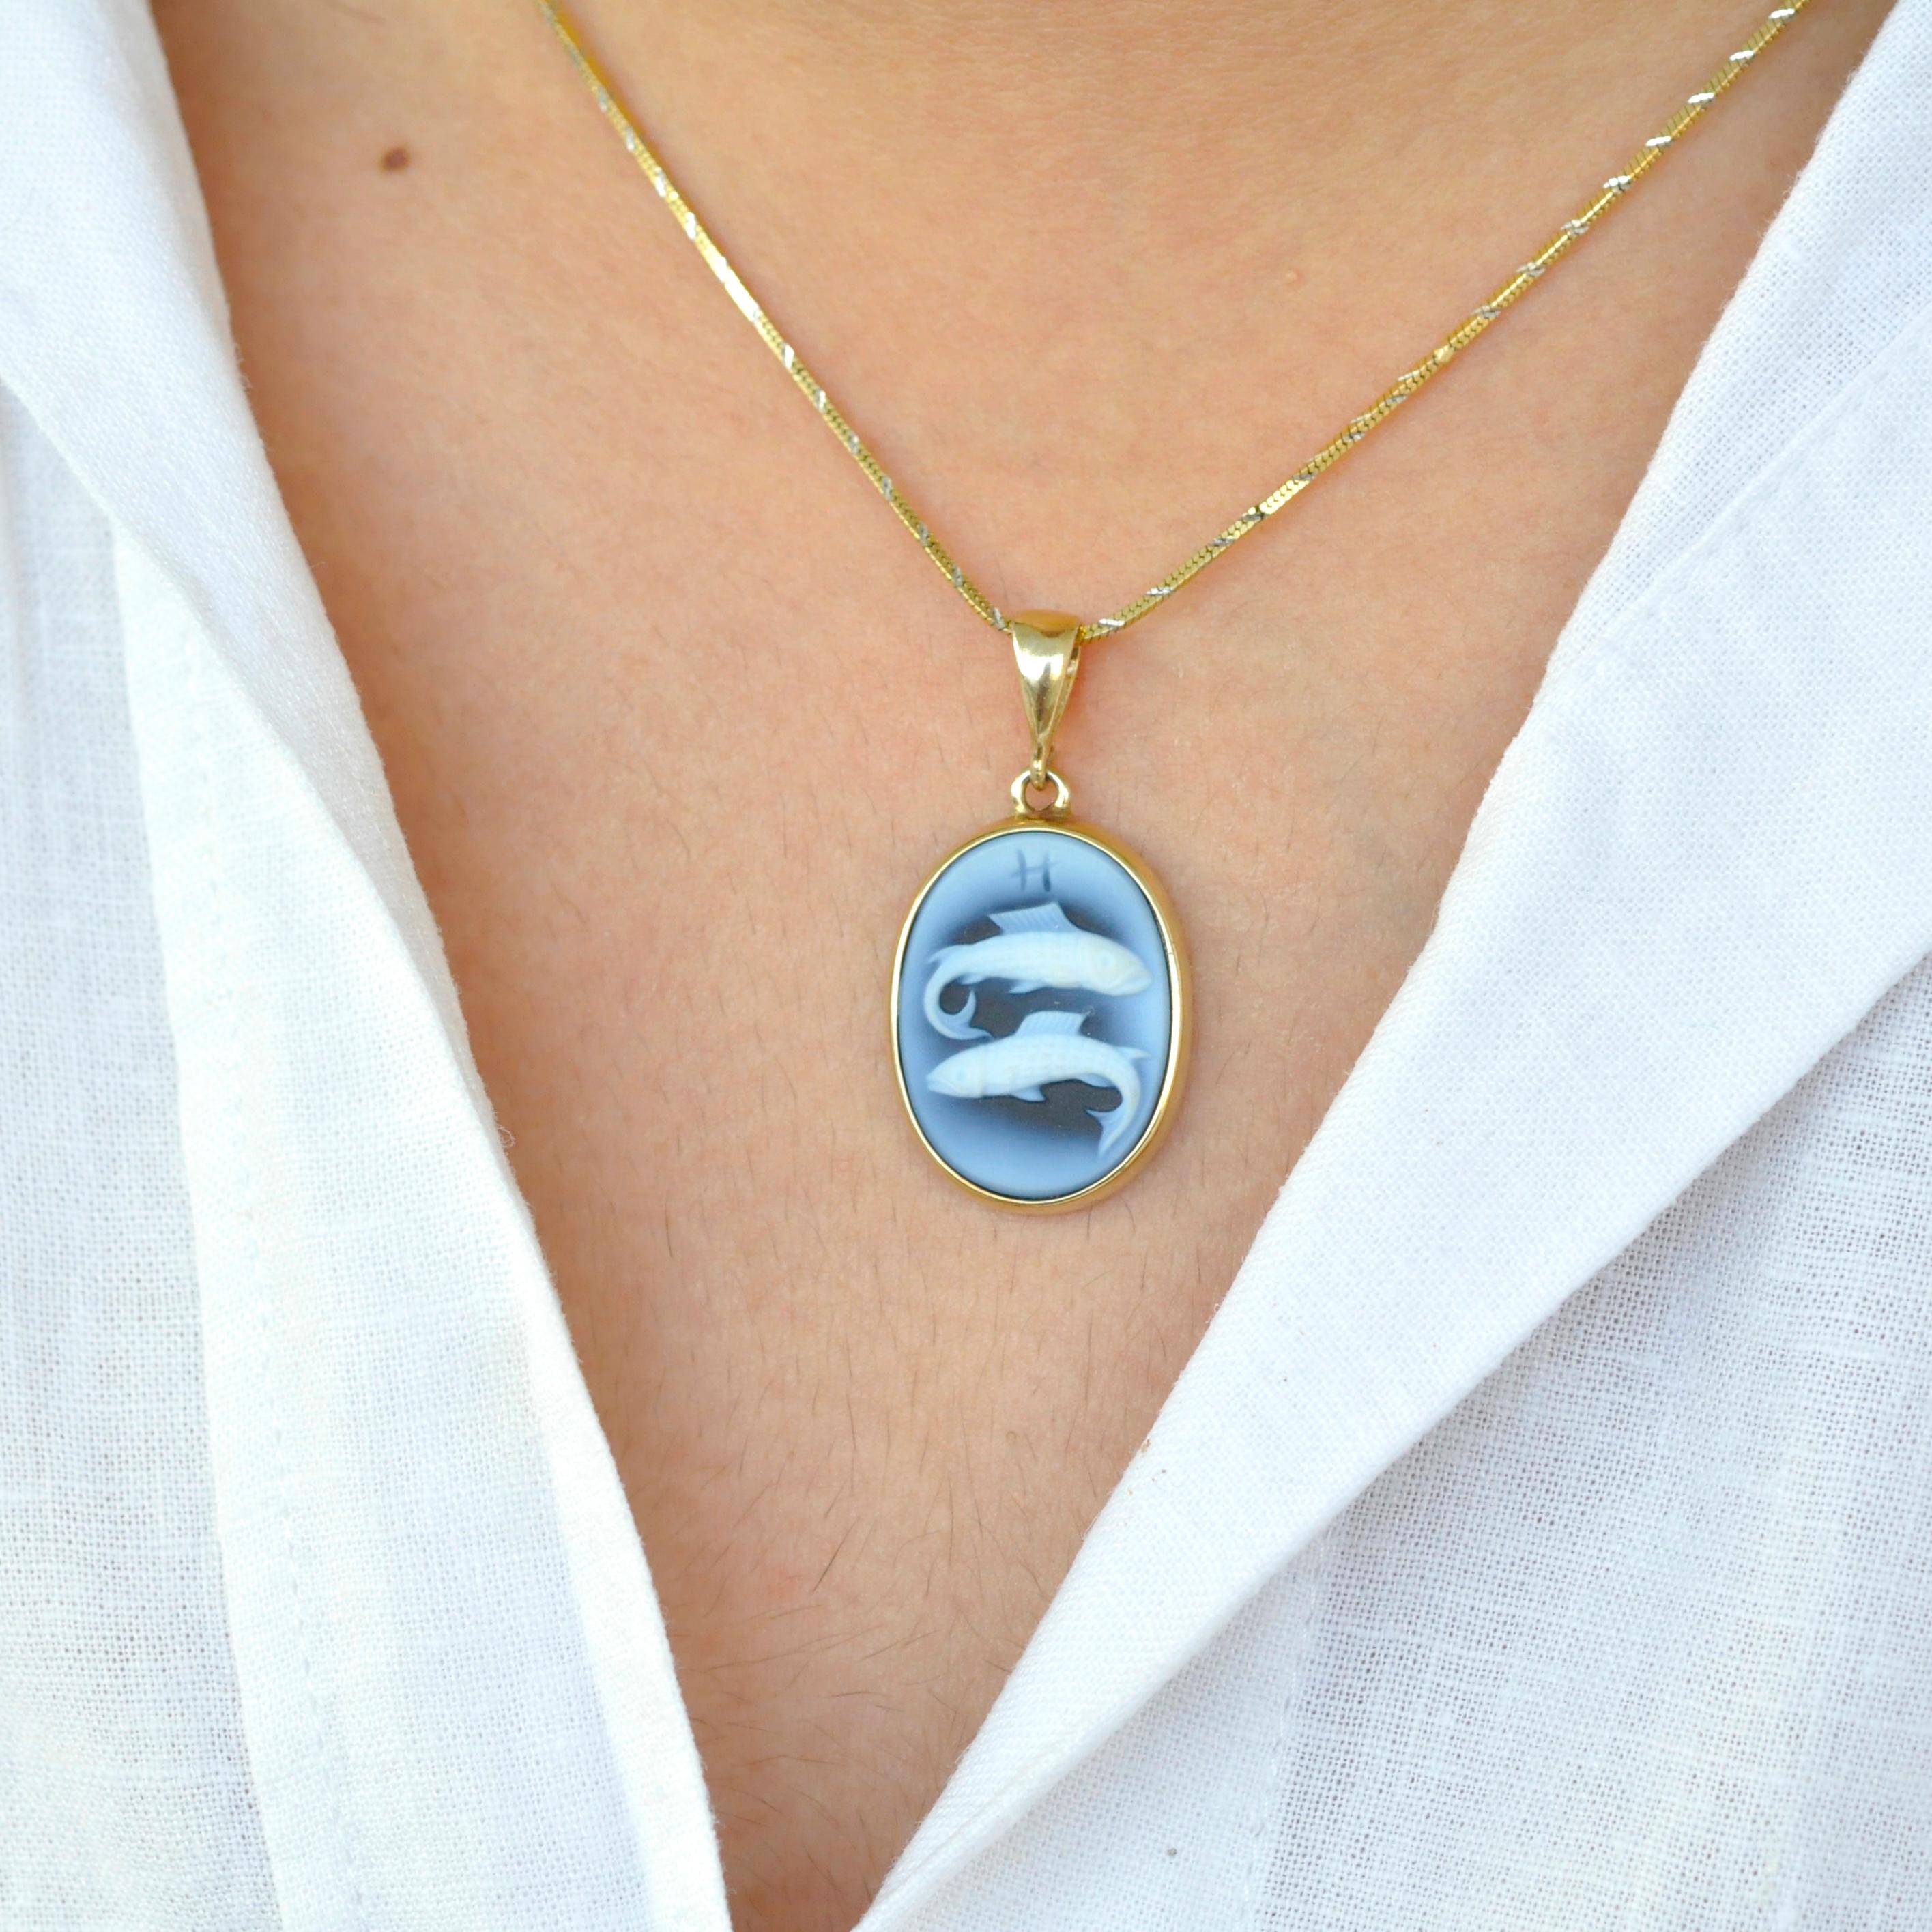 Here's our pisces zodiac carving cameo pendant necklace from the zodiac collection. The cameo is made in Germany by an expert cameo engraver on the relief of 100% natural agate rock from Brazil (a variety of chalcedony). The pendant is set in our